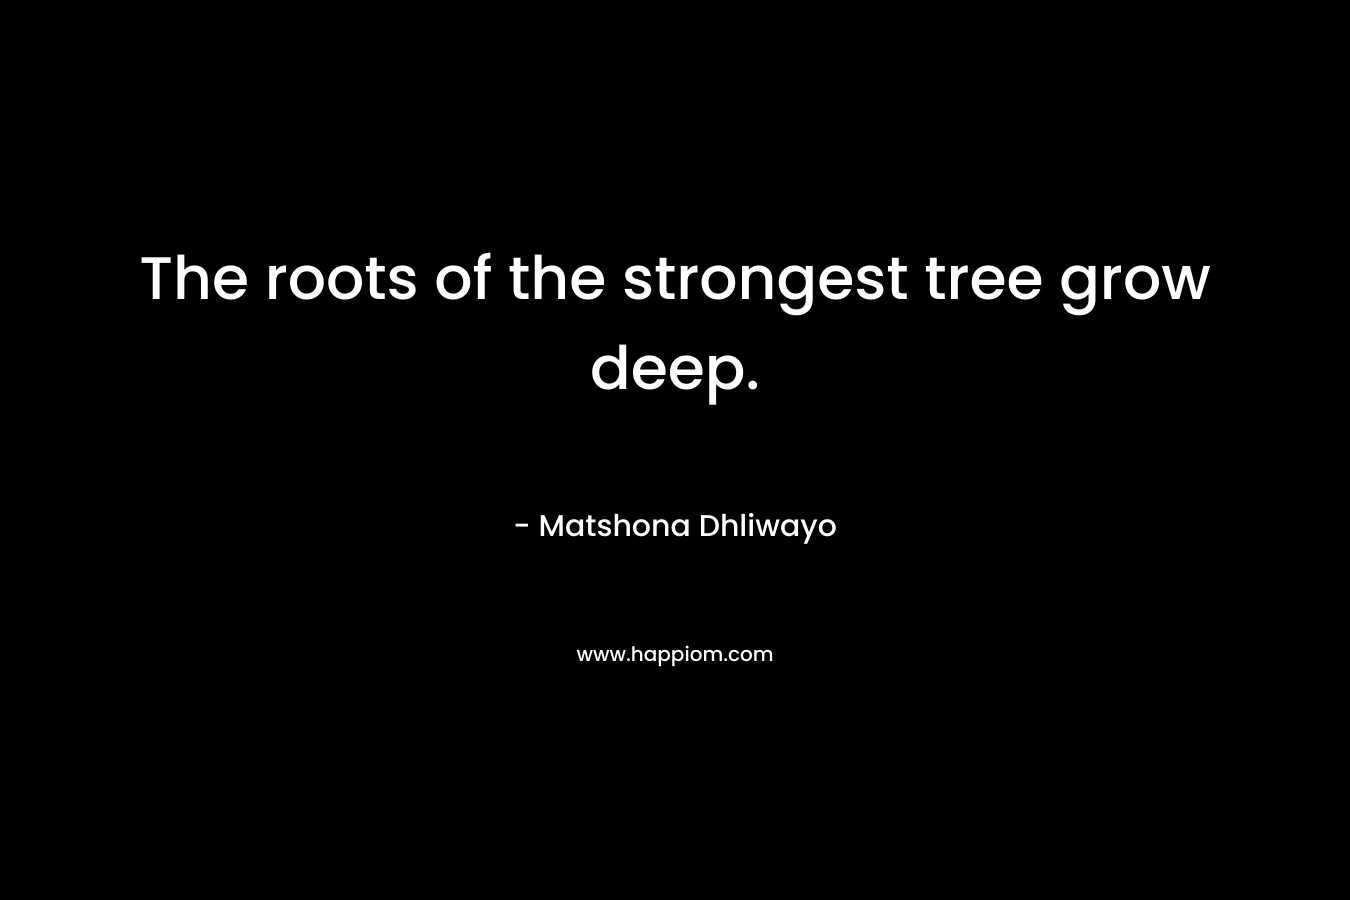 The roots of the strongest tree grow deep.